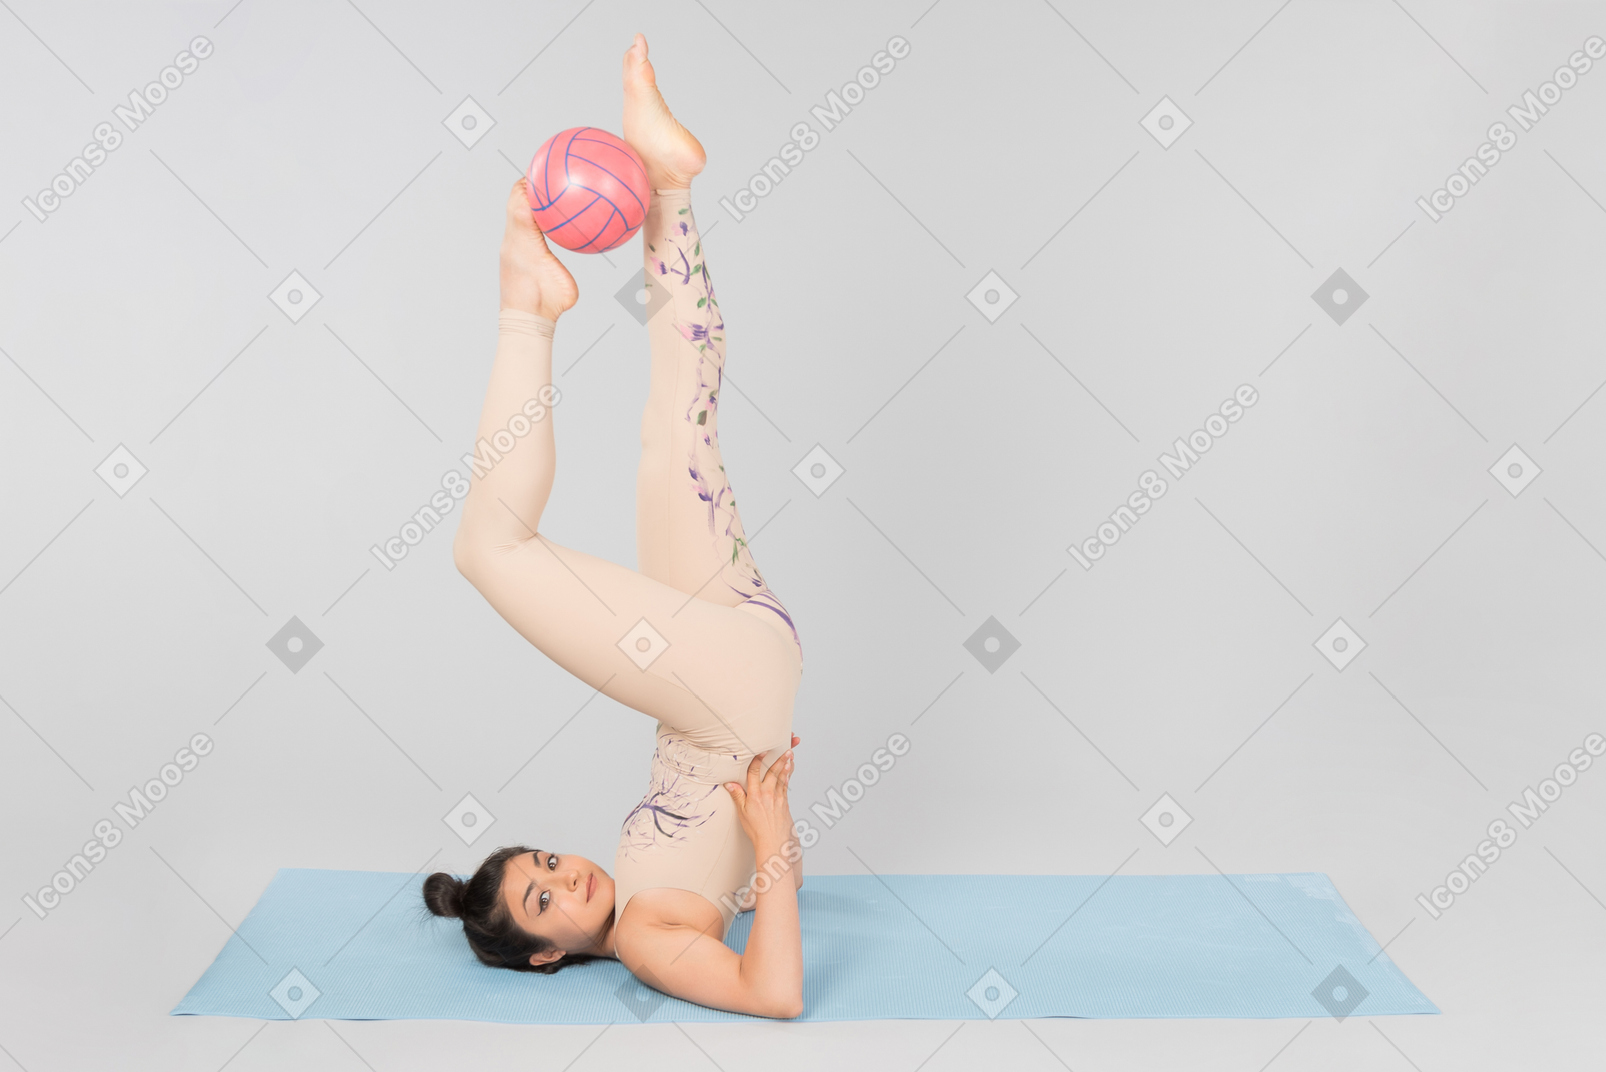 Young indian gymnast lying on yoga mat on the back and holding ball up with legs